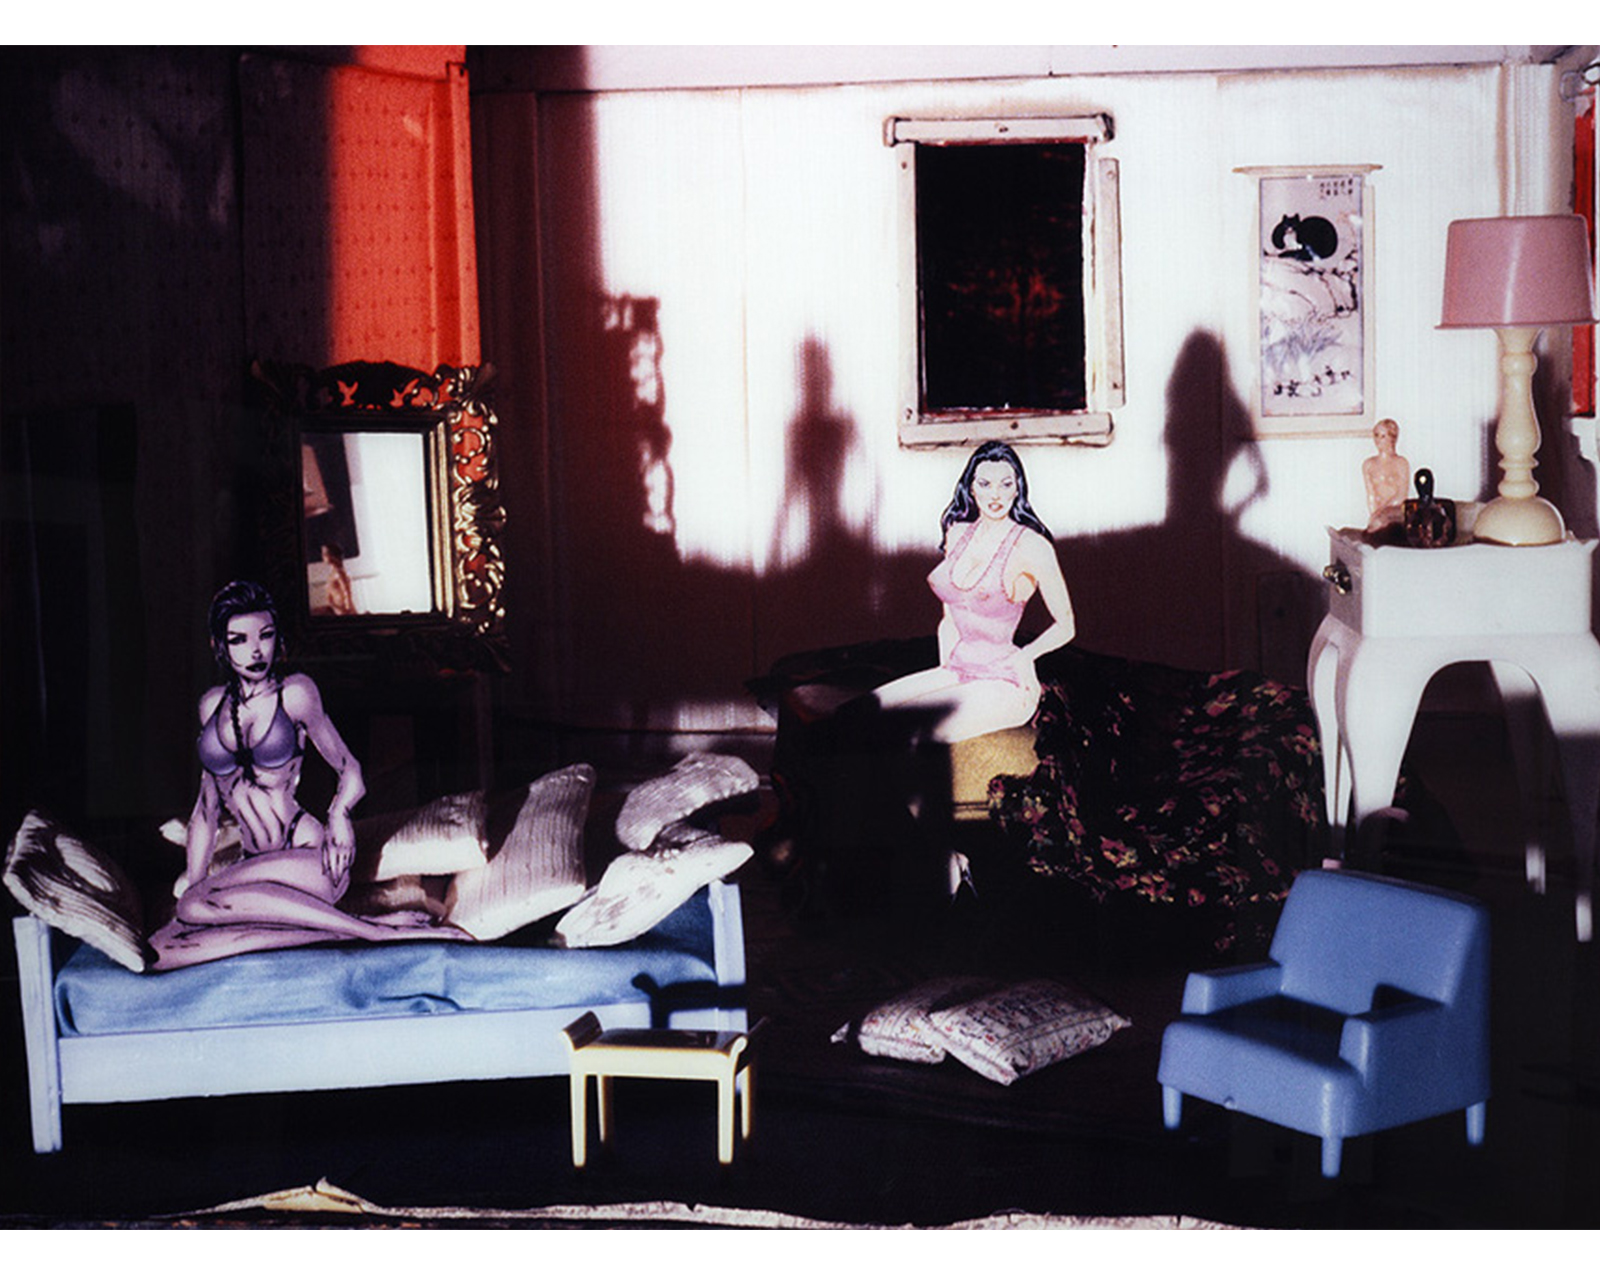 room with gilt mirror on left wall, couch at lower left with woman in underclothes seated on it among many pillows, small table near bed, armchair at lower right, table with lamp and objects at mid-right, scroll on wall, window in back center, unmade bed with floral blanket and woman seated on it wearing bra and underpants